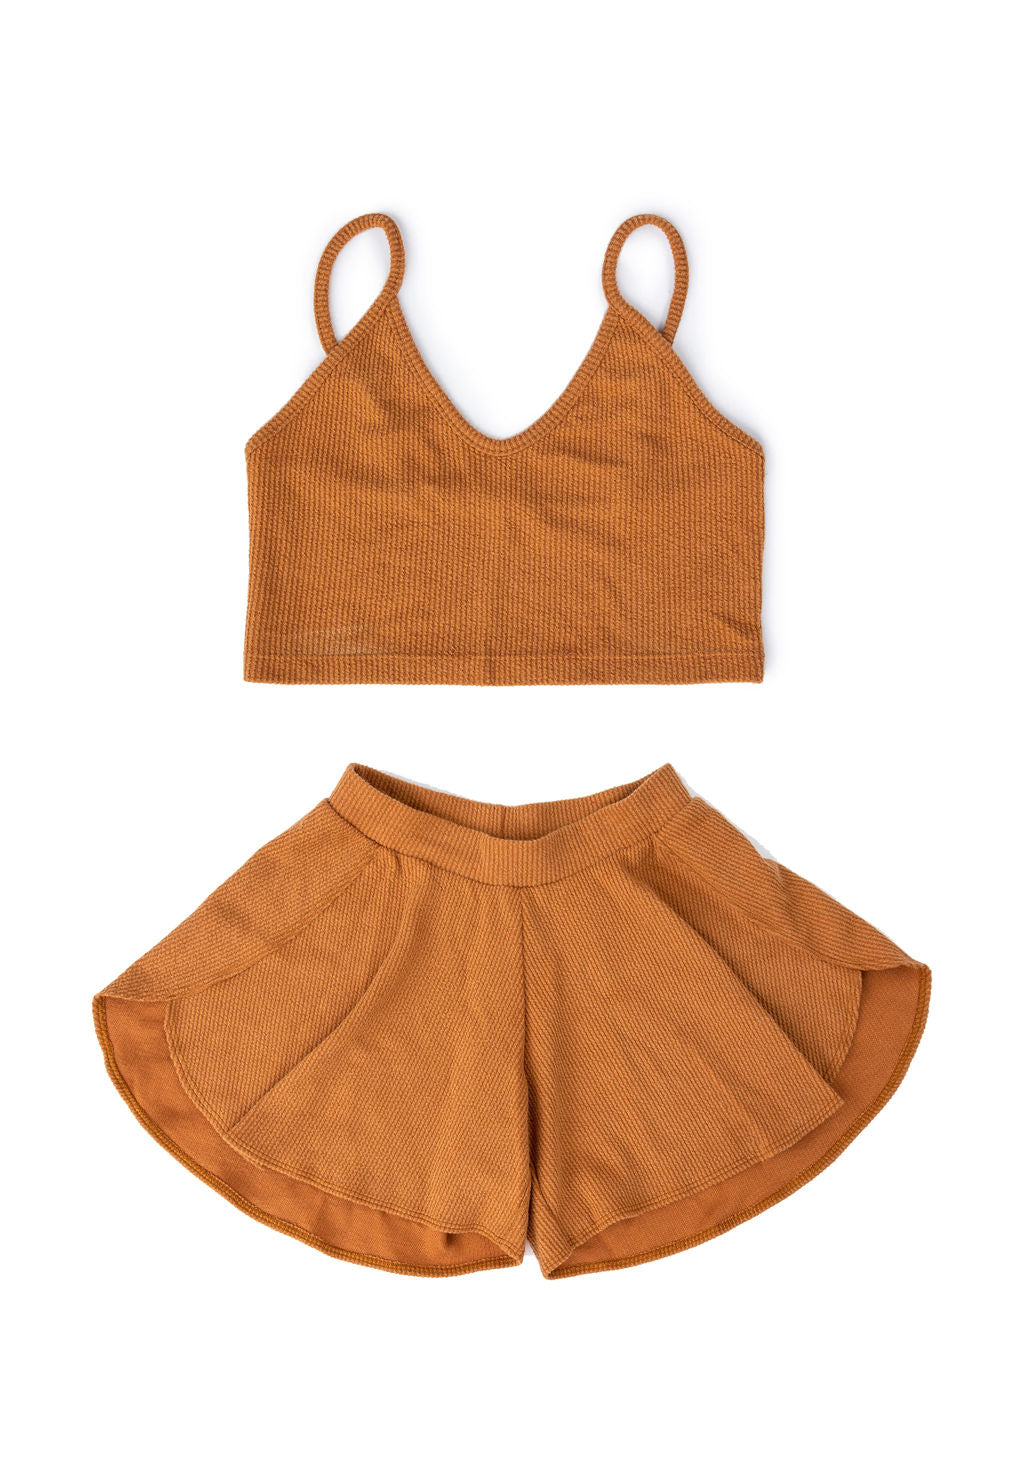 Pull on and flow. These flowy shorts are inspired by hot AF Arizona days when pants are too much to bear. The anti-jeans. With ribbed cotton and an elastic waistband, they’re just the last-minute disguise your bikini bottoms need for your next adventure. Pop on the matching crop top and you’re all set! Created by PUNKWASP